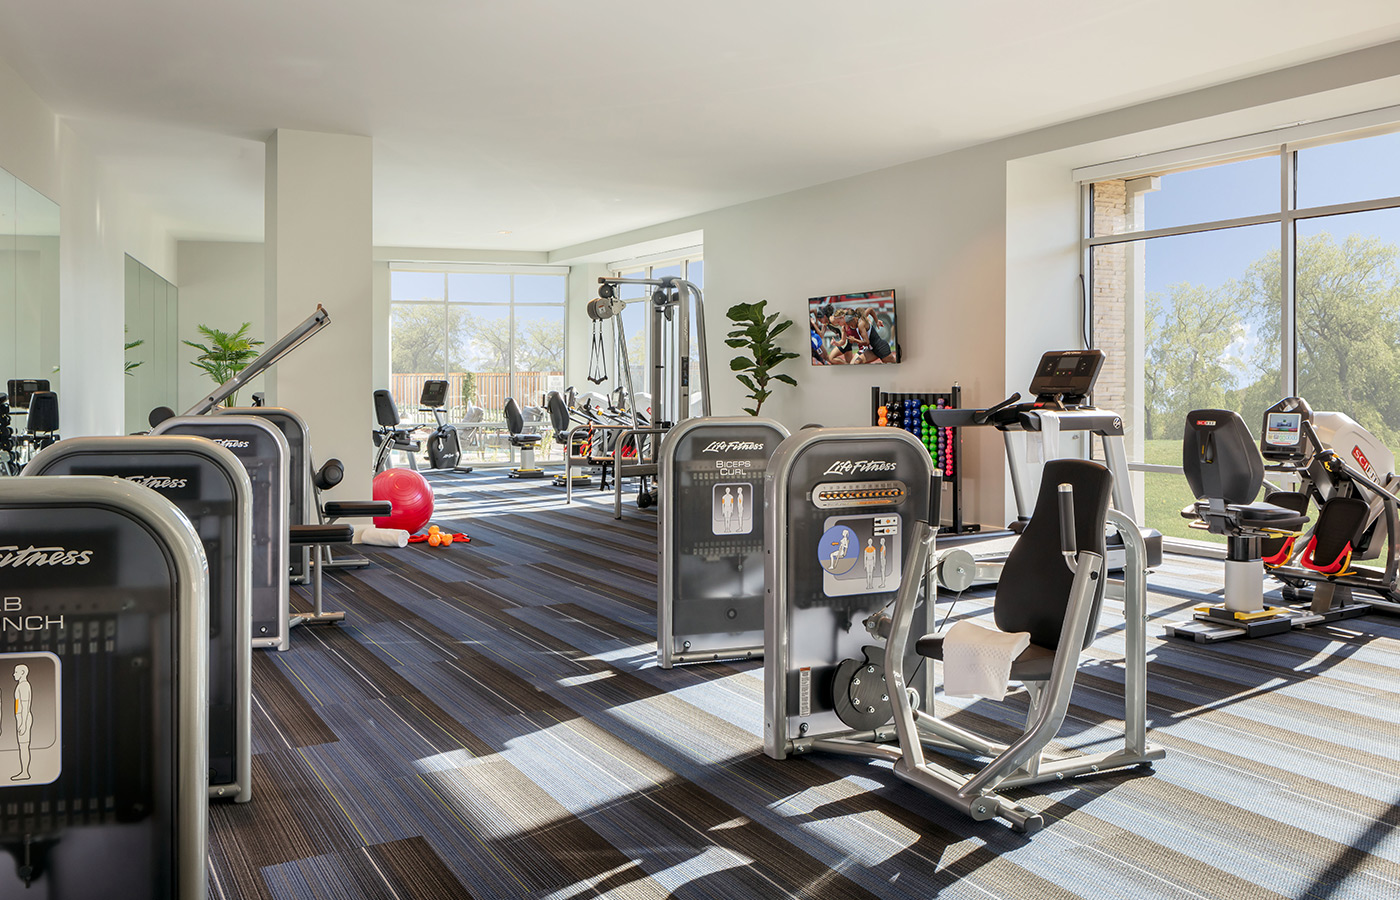 A large fitness center with exercise equipment.